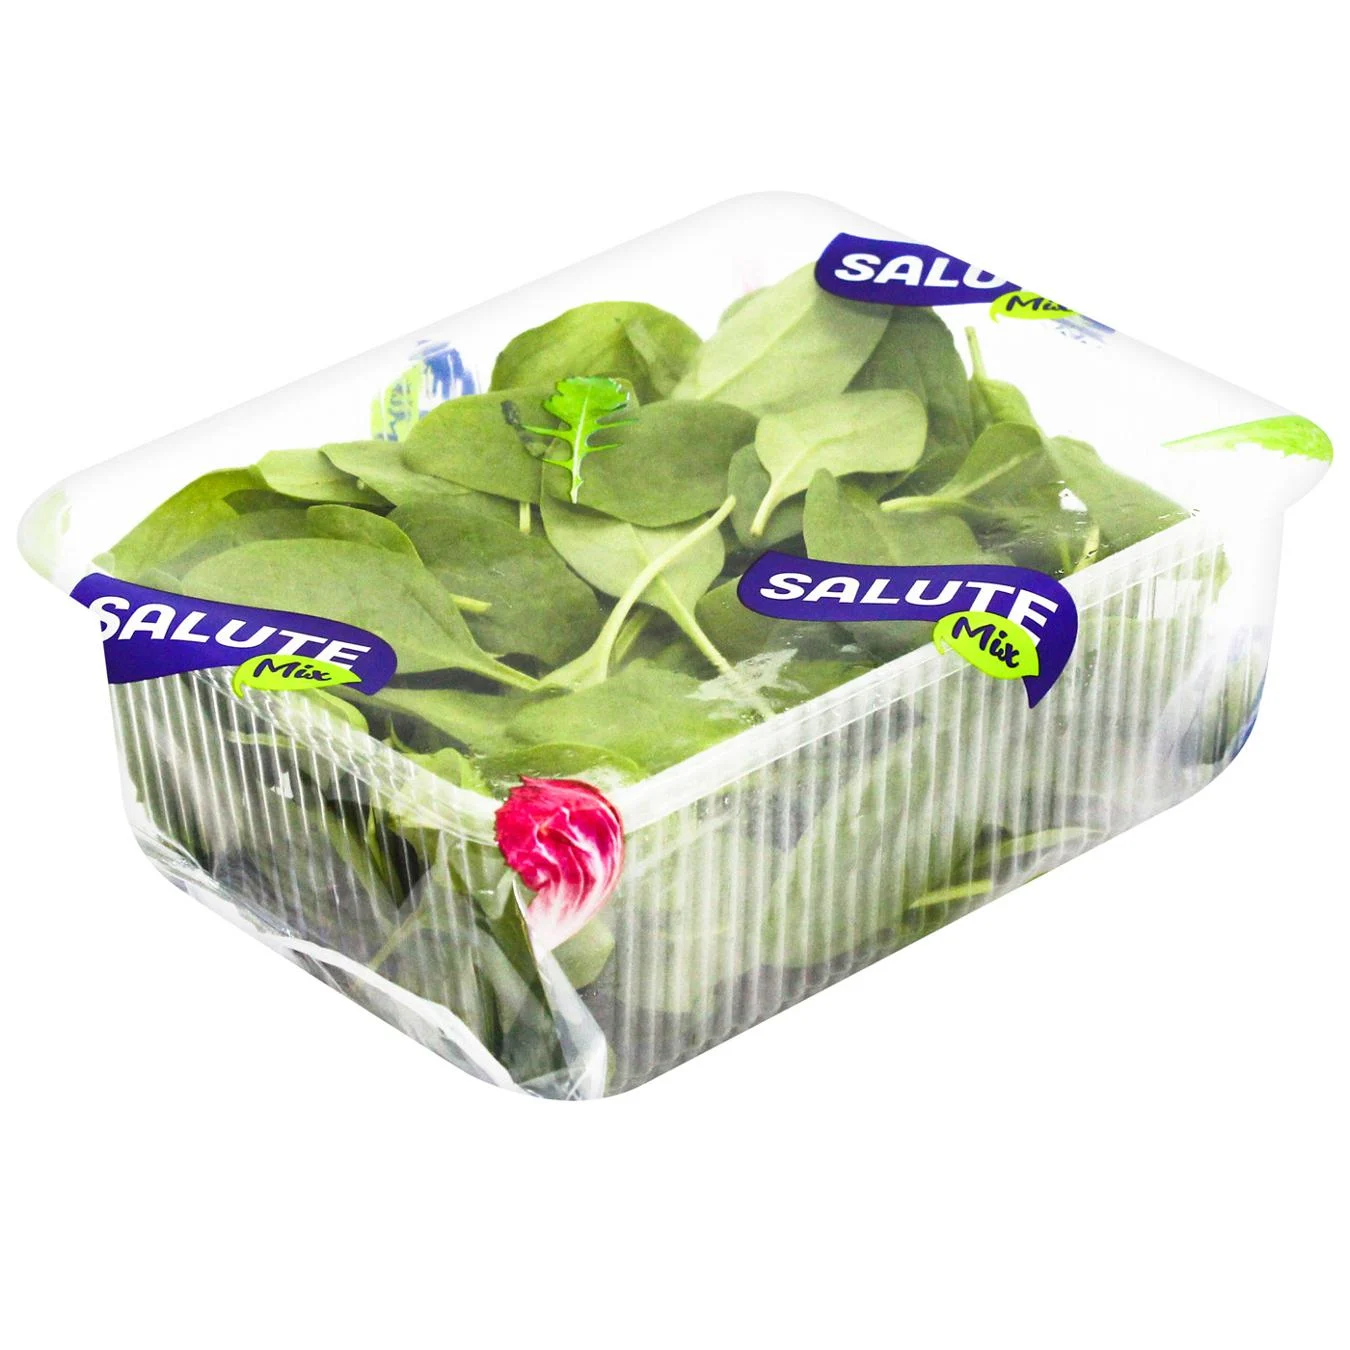 Salute pak choy mix with spinach 75g